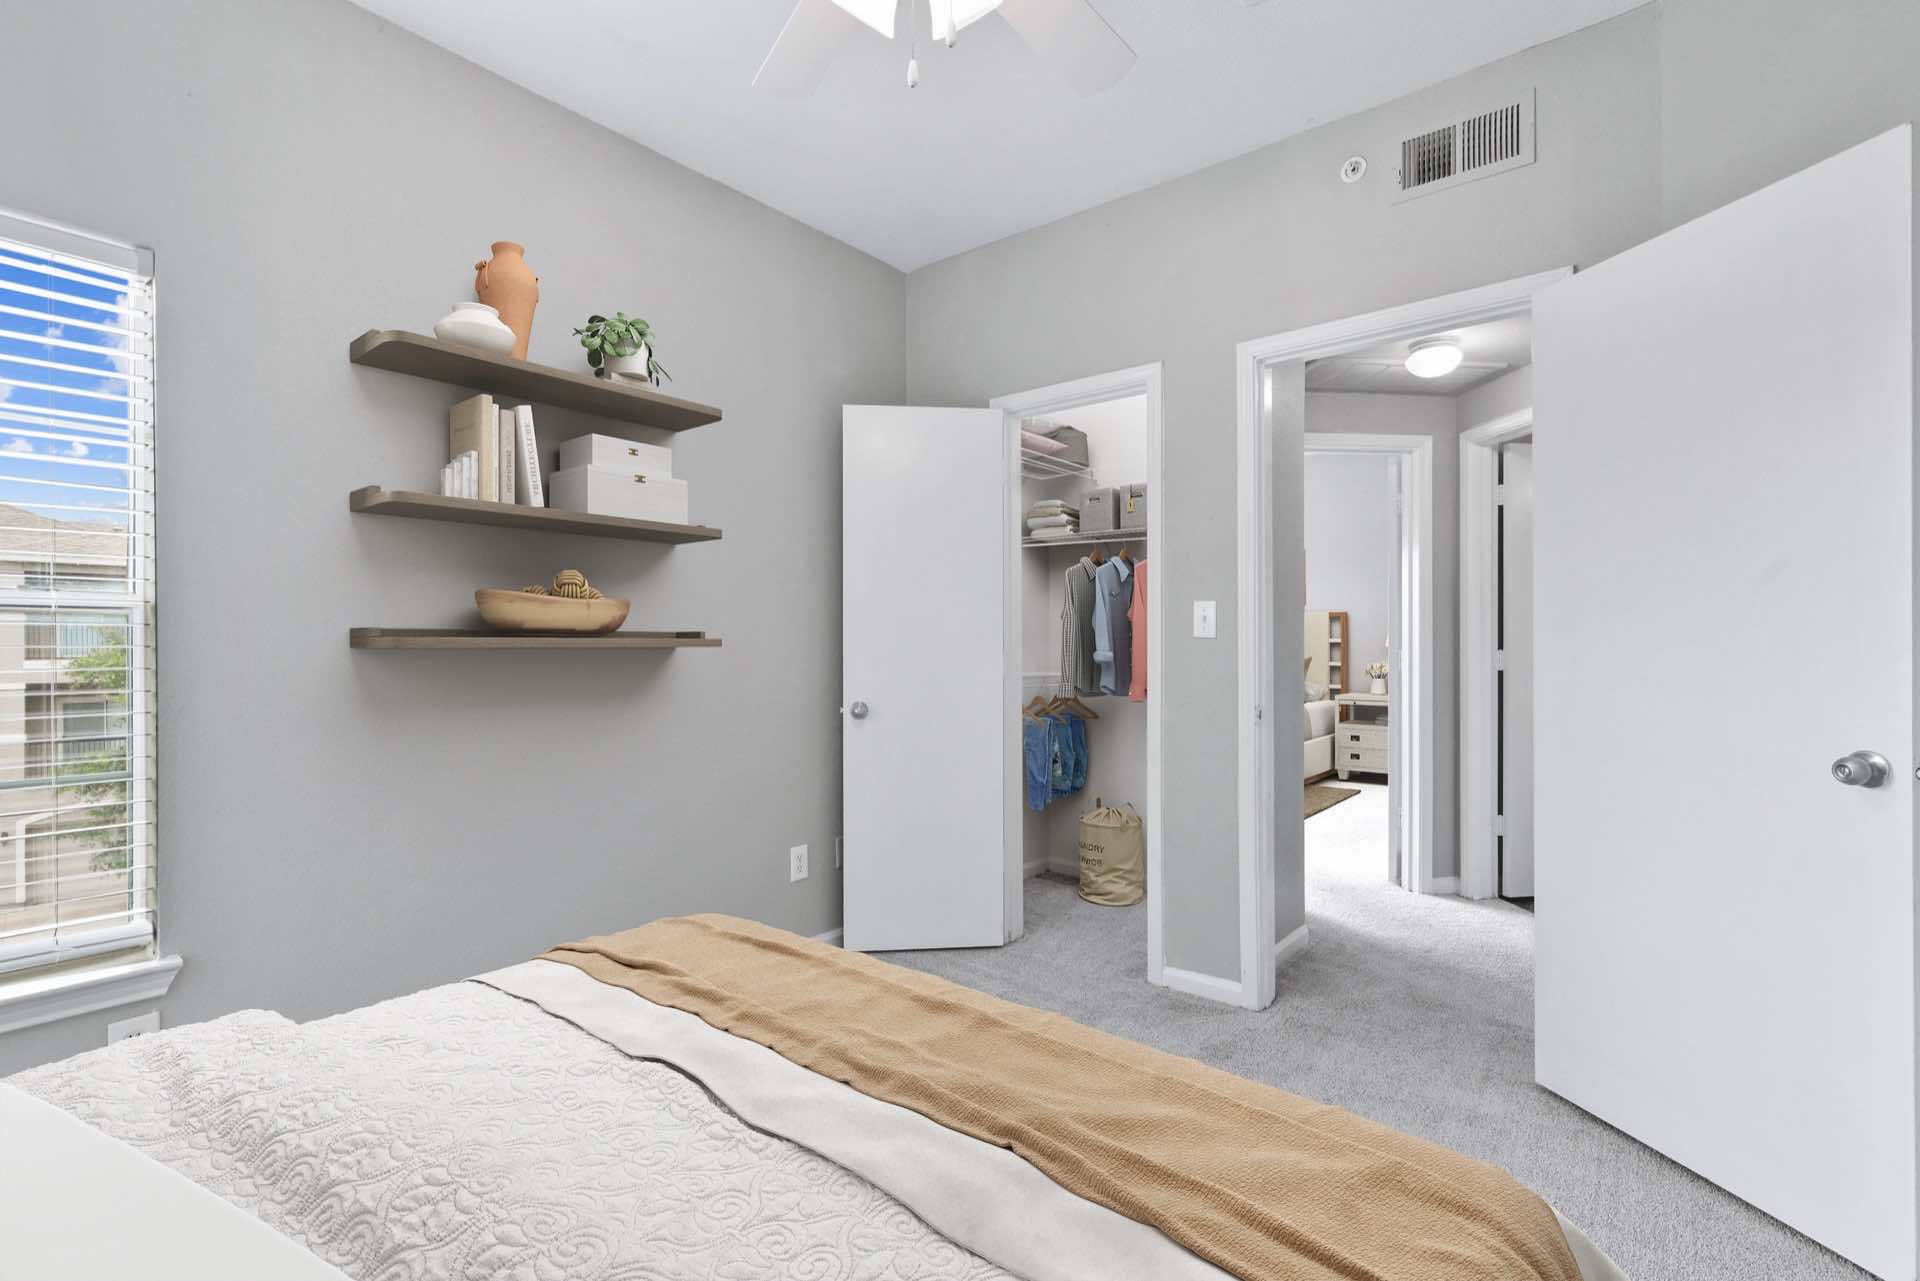 Carpeted bedroom with reach-in closet